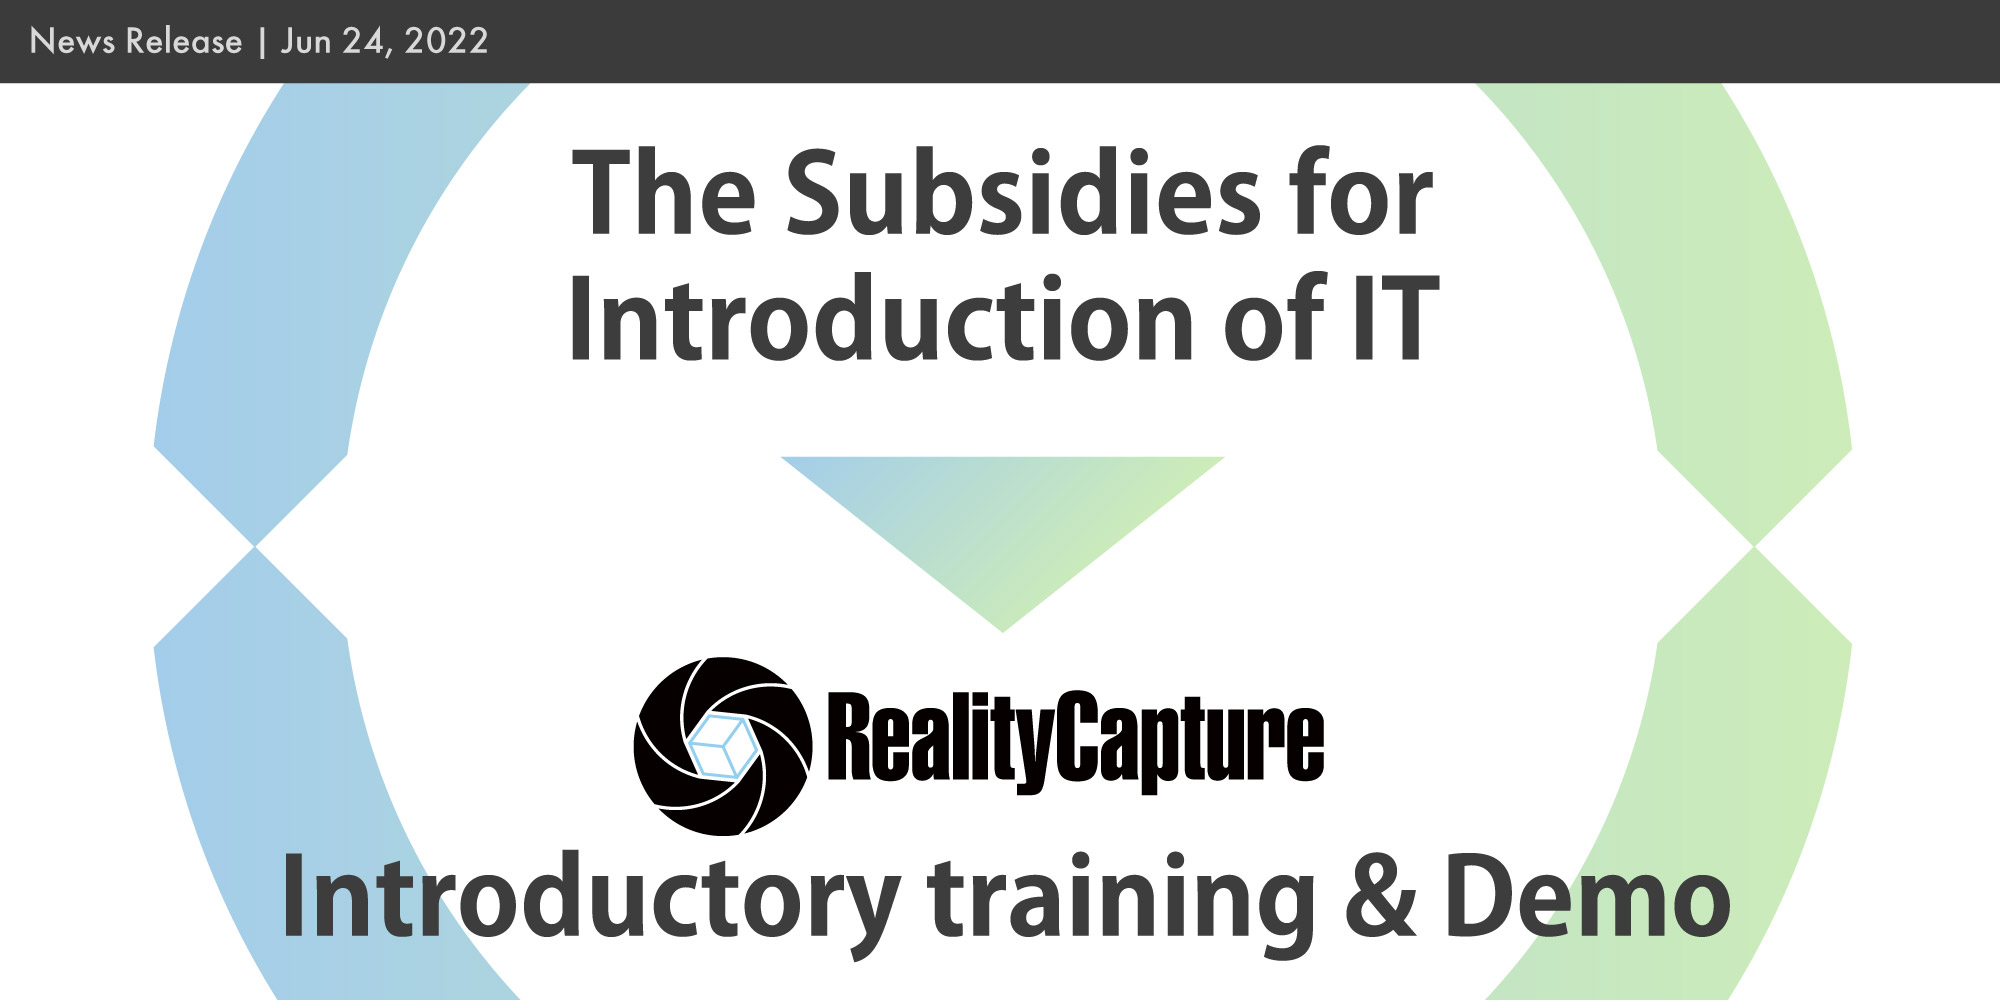 The introductory training for RealityCapture has been certified as eligible for the 'IT Introduction Subsidy Grant'.